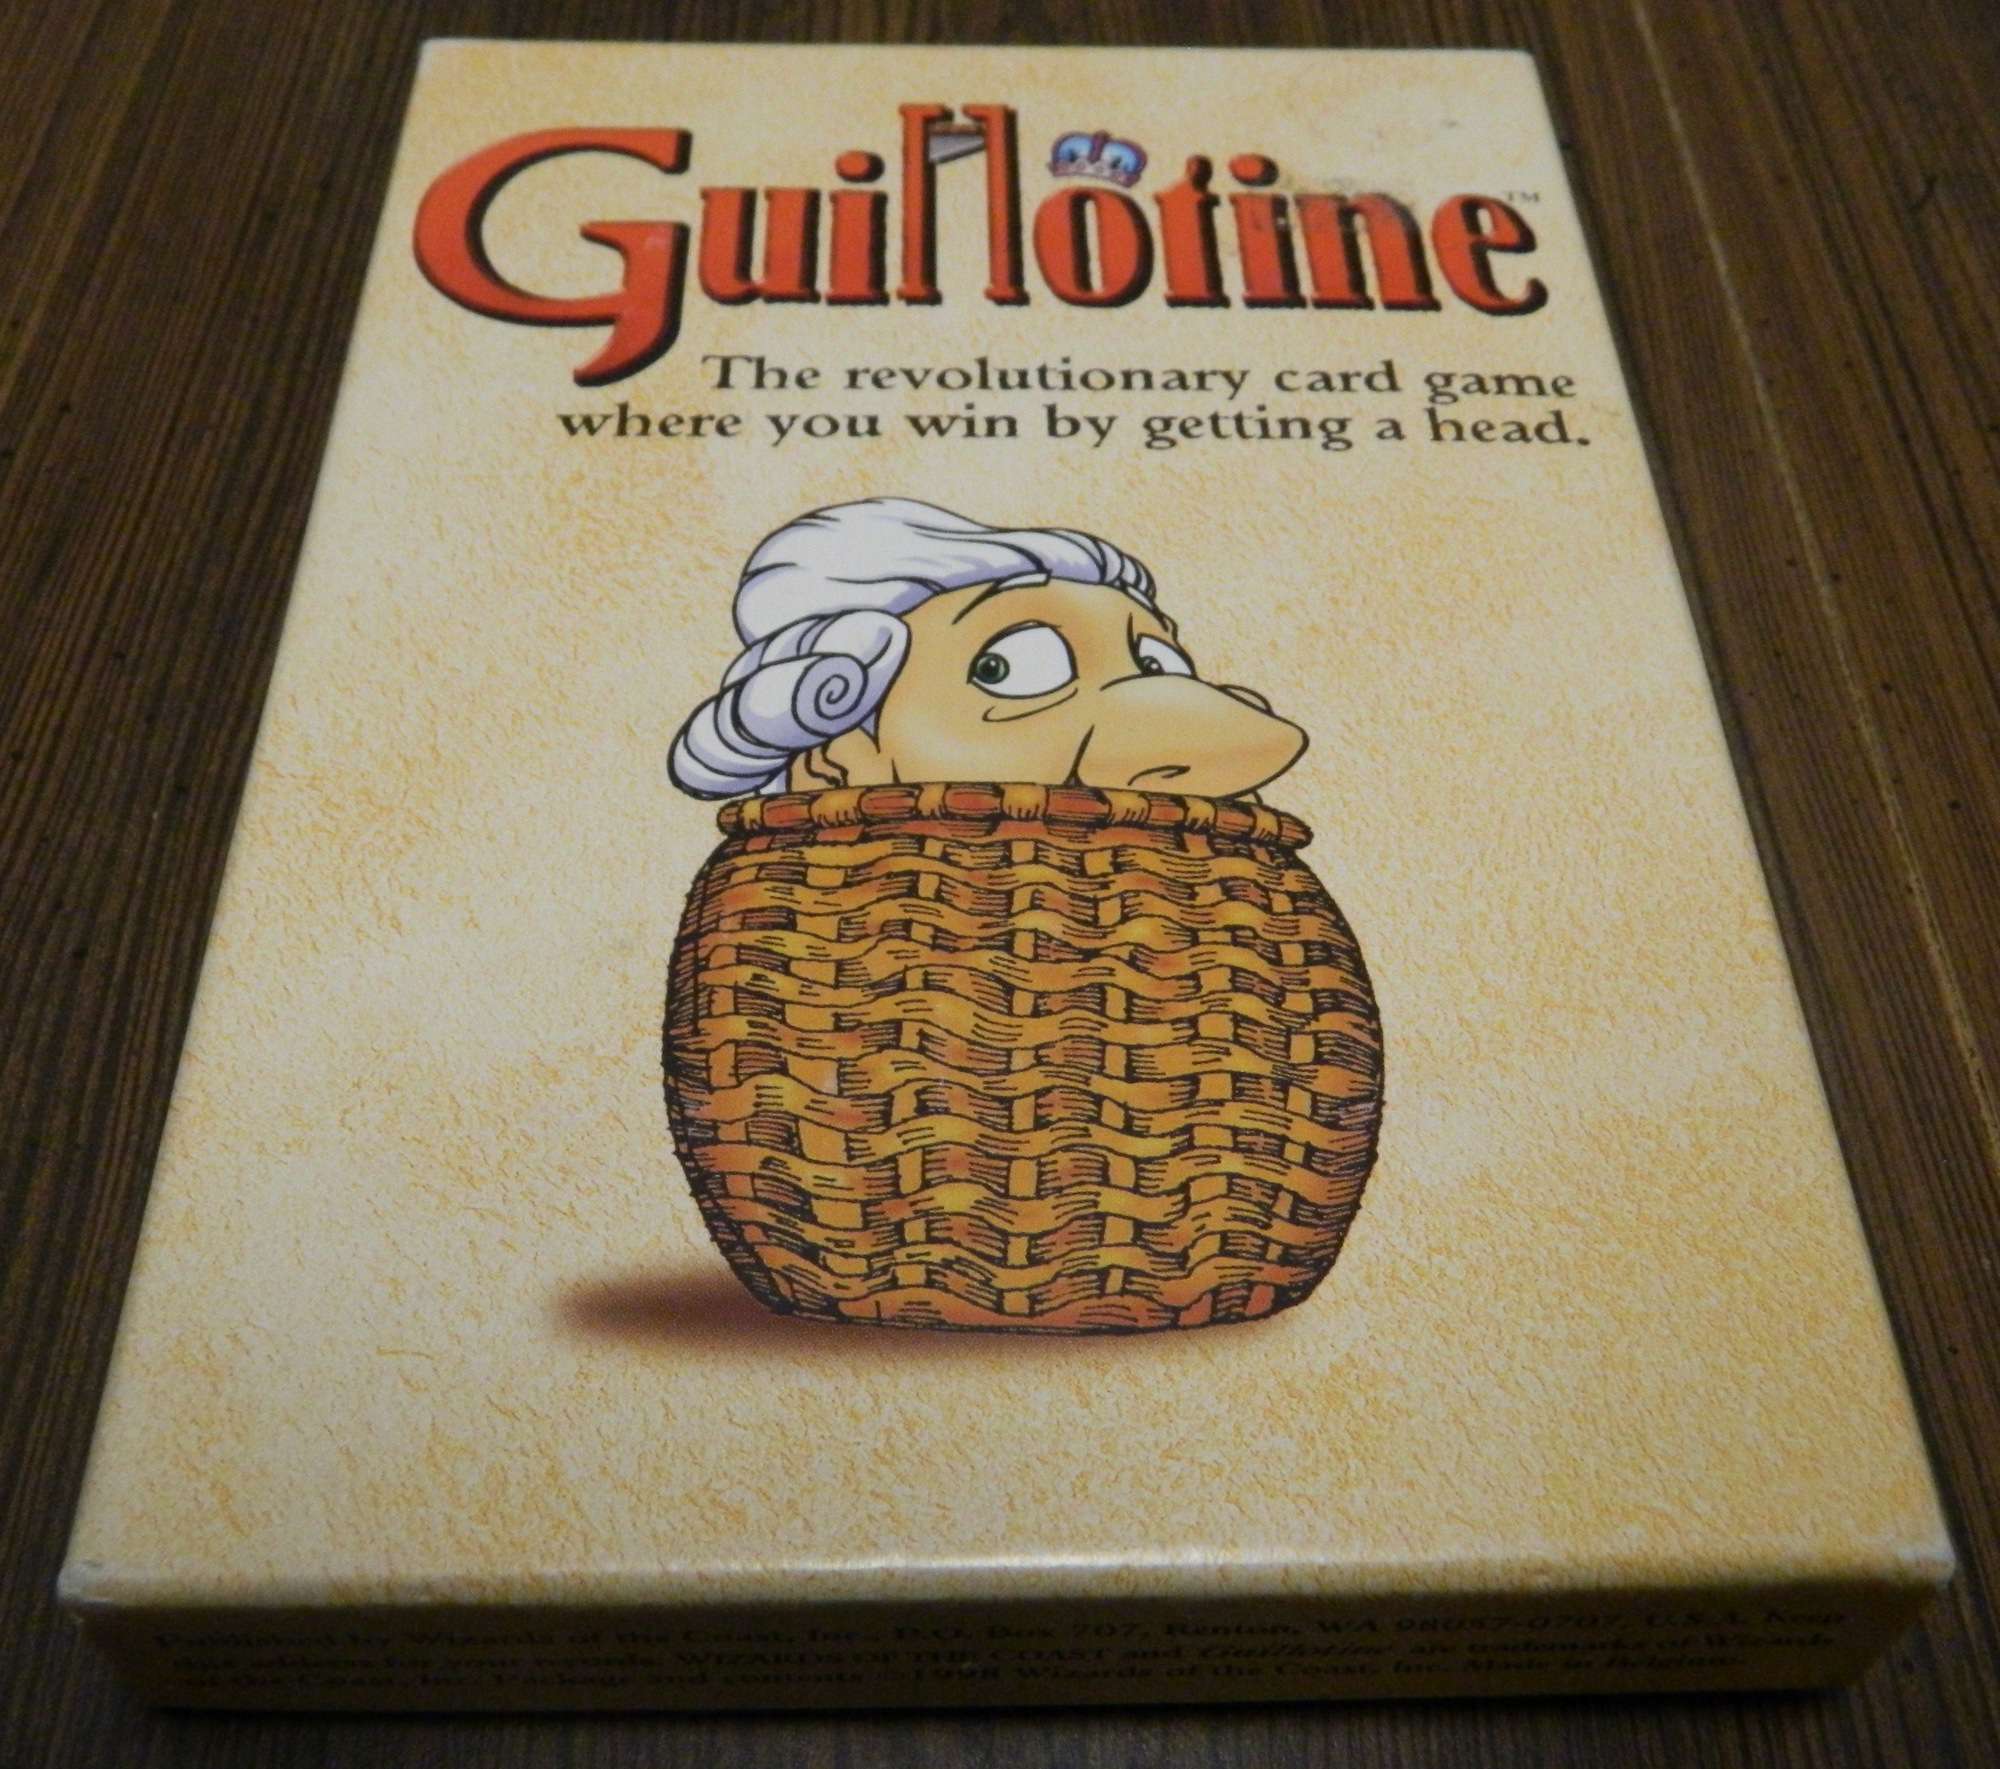 Guillotine Card Game Review and Instructions